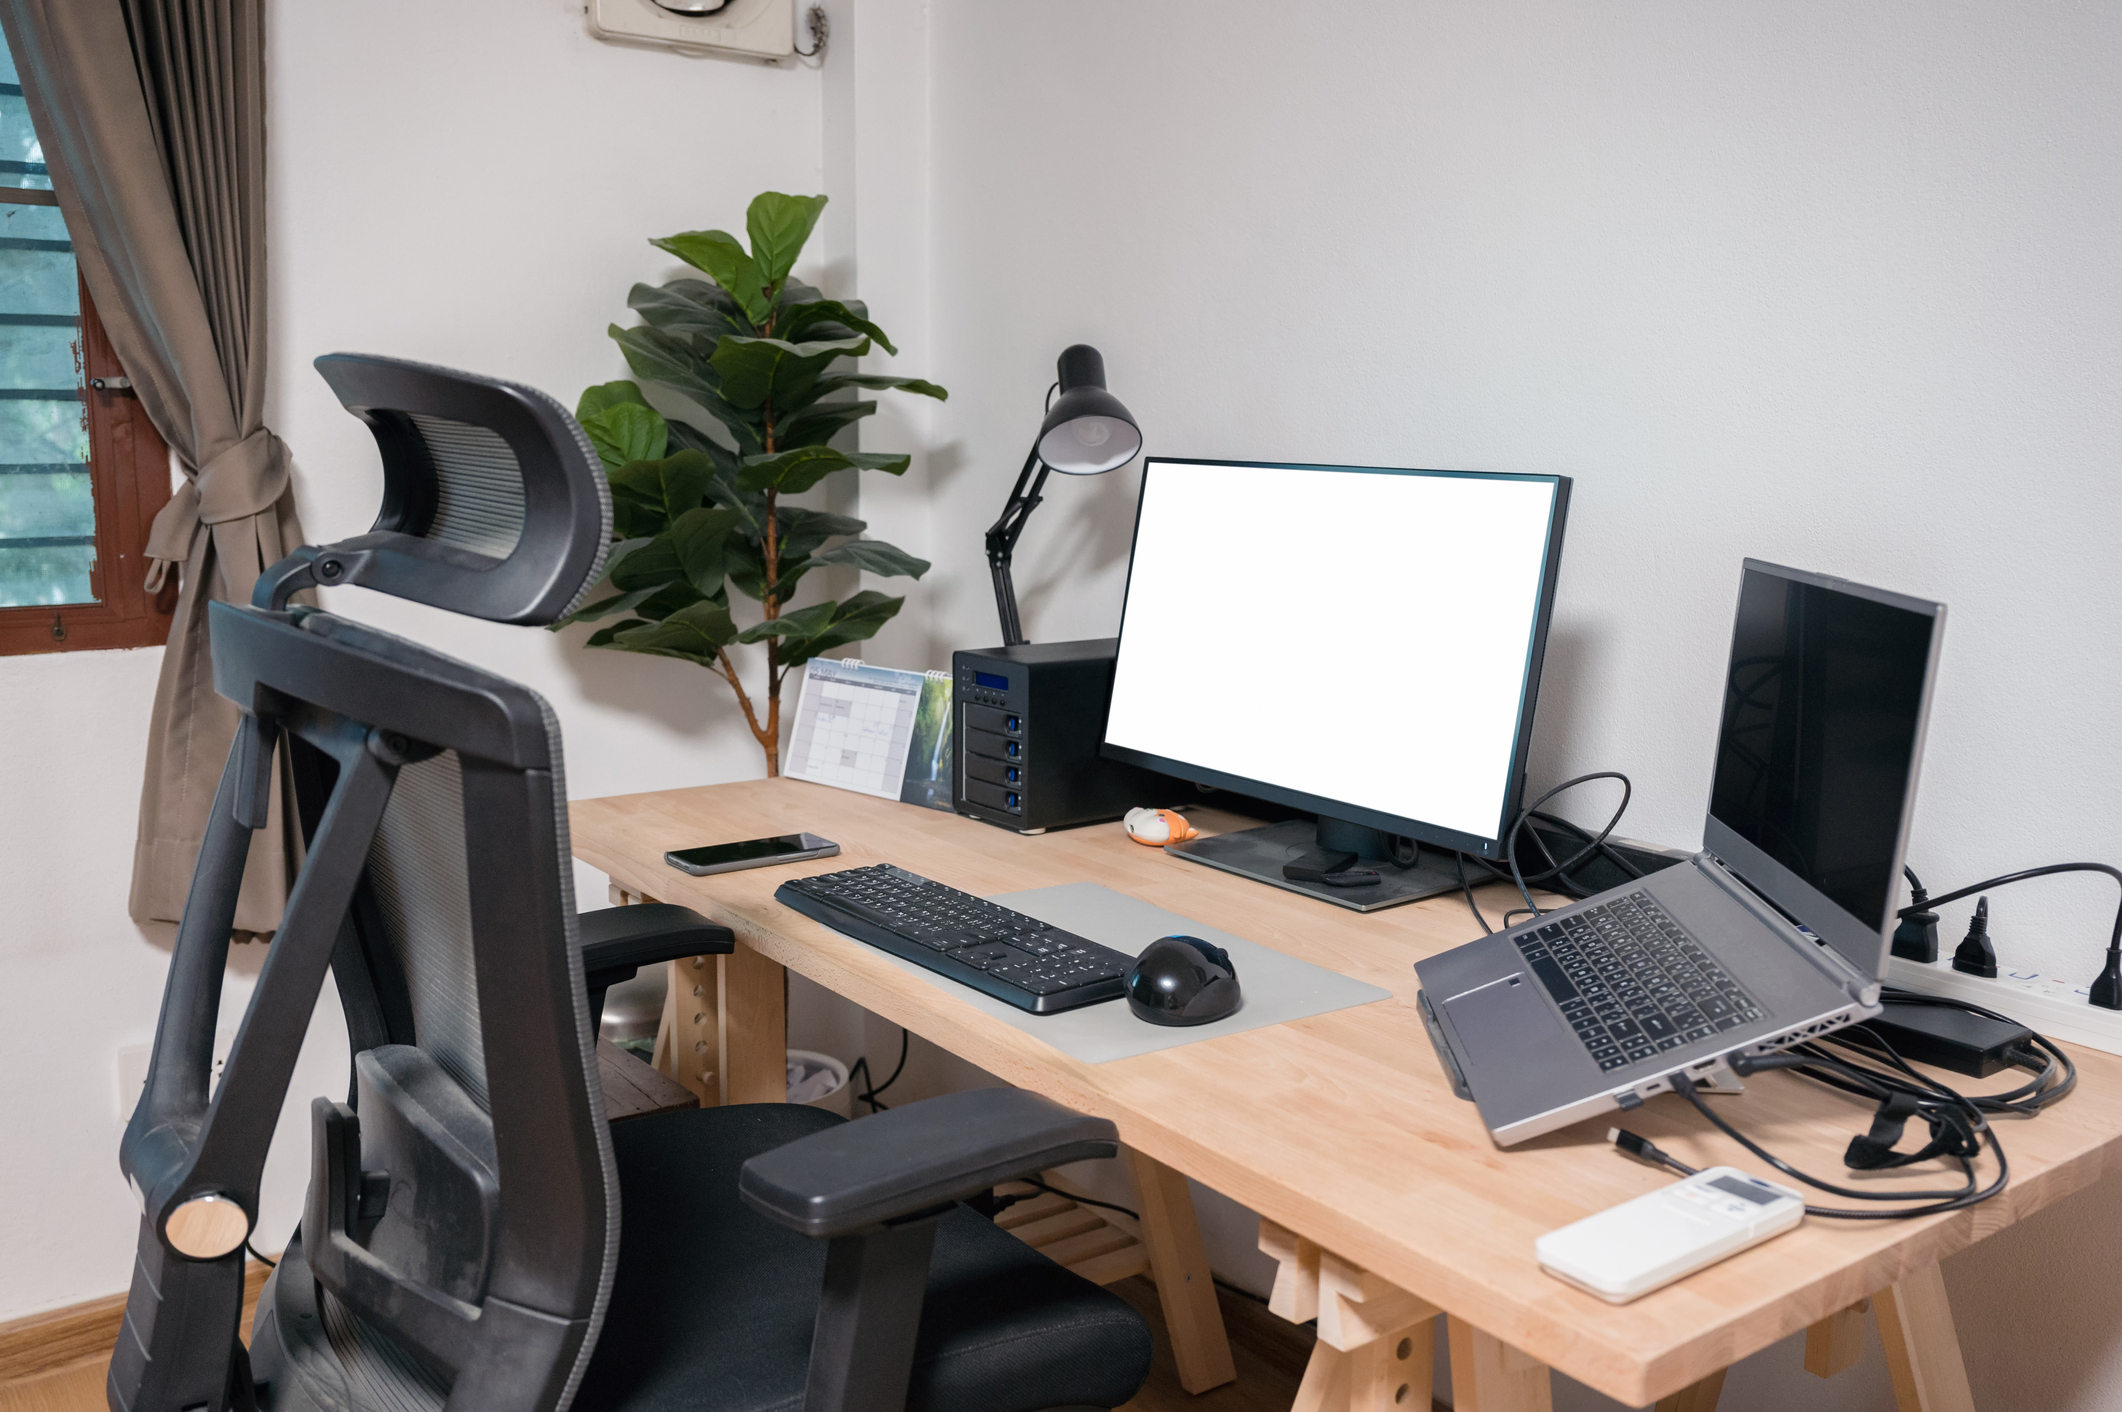 A picture of a desk that has an ergonomic chair and a monitor